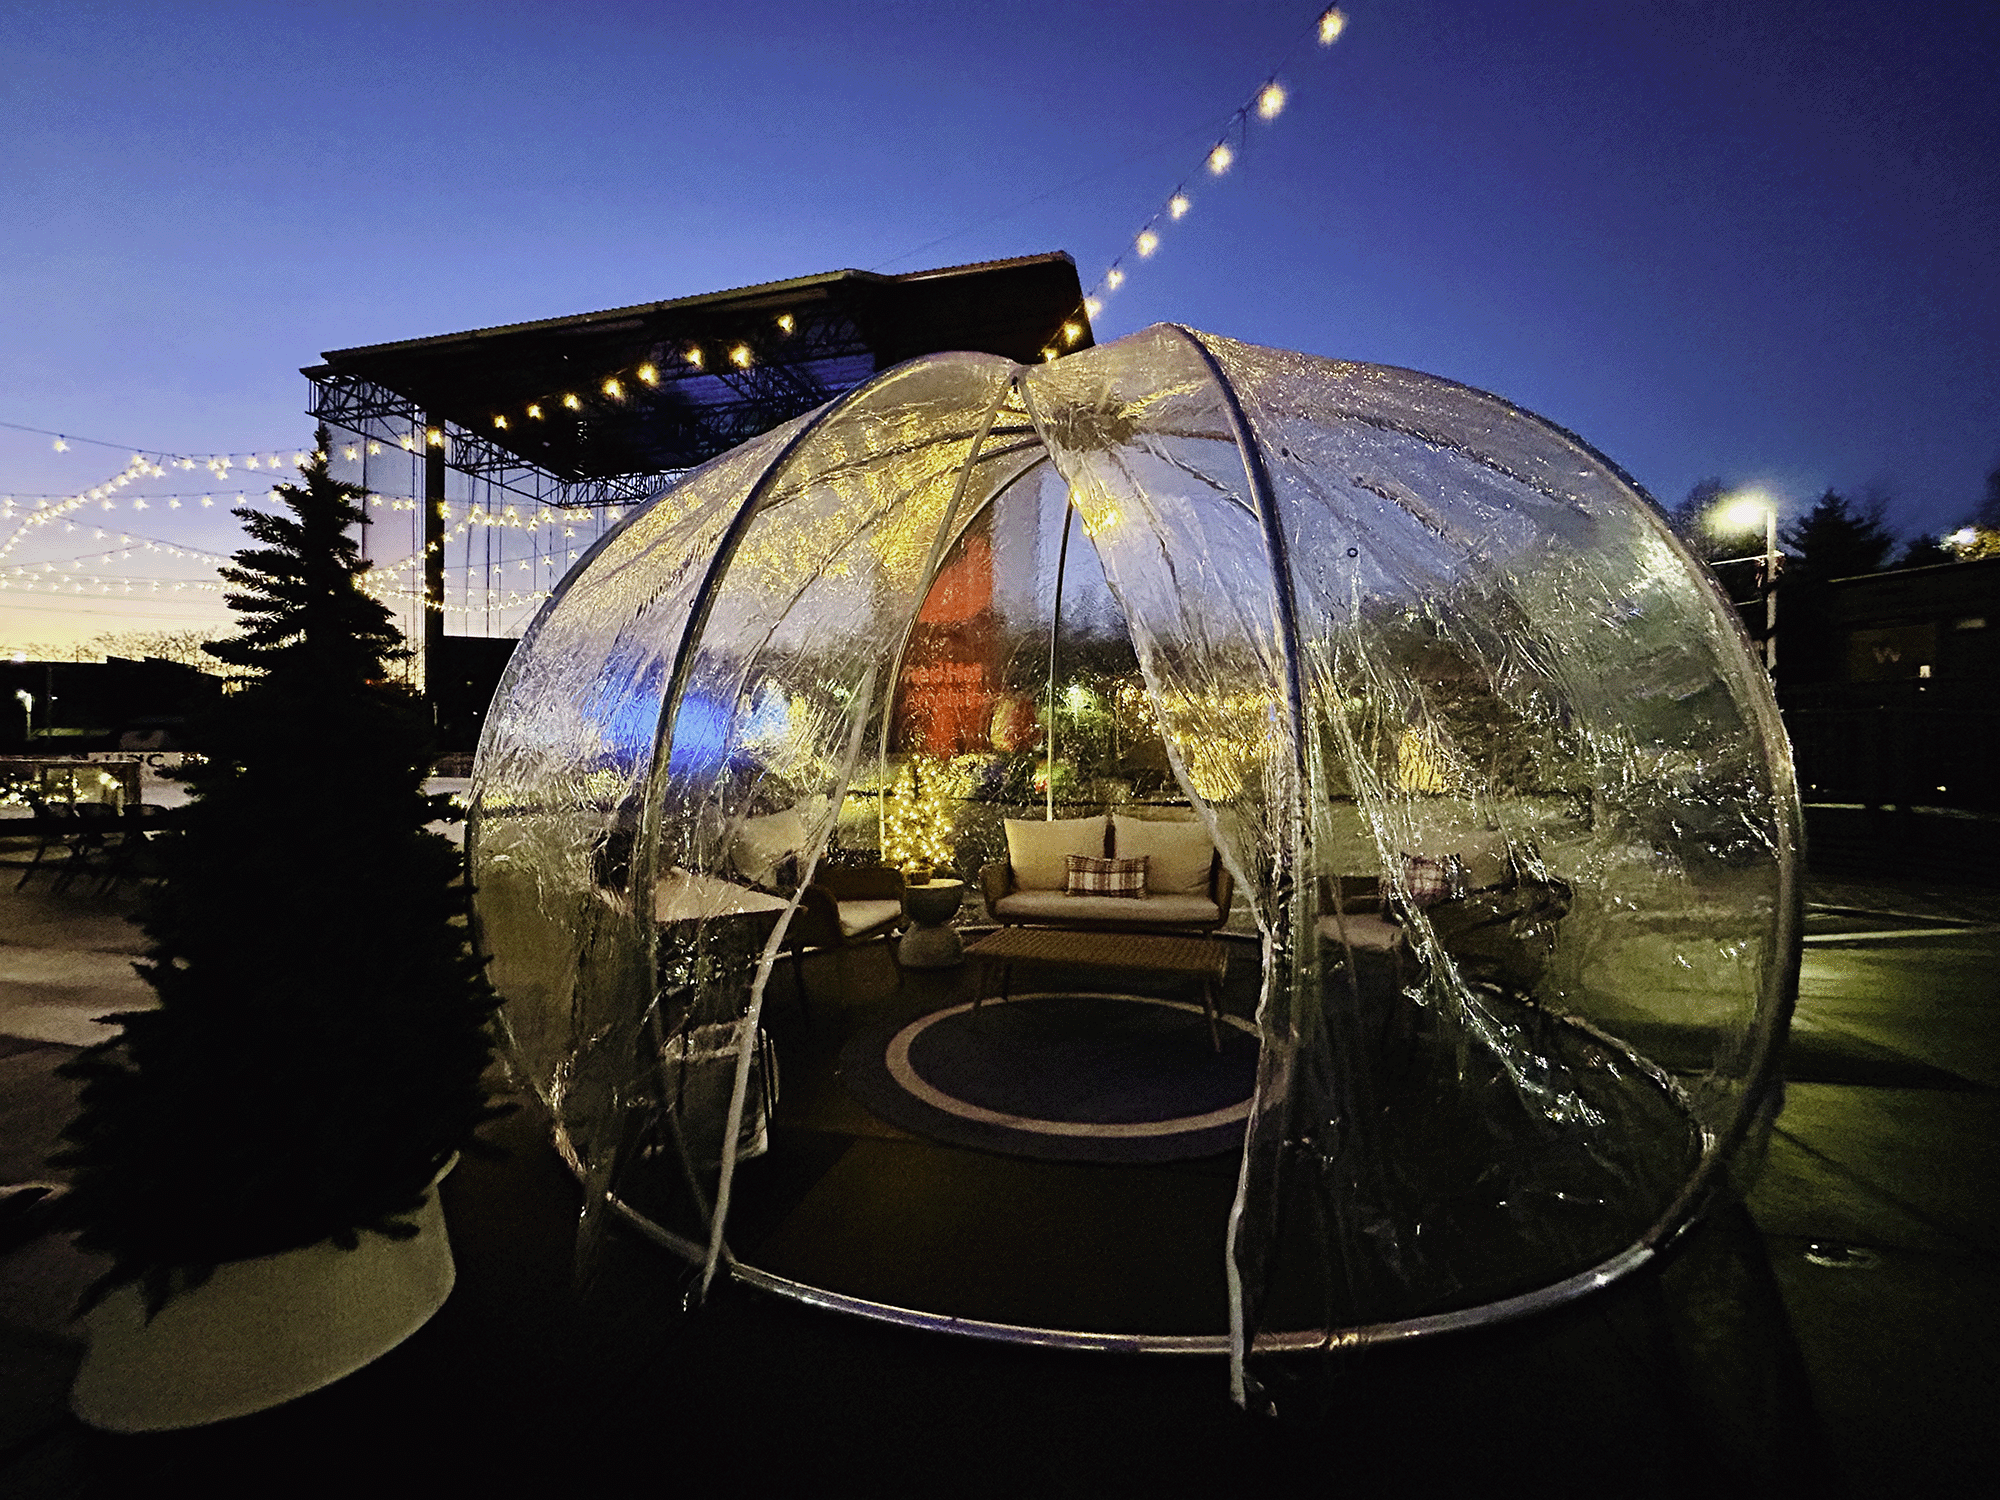 An igloo at The Rink